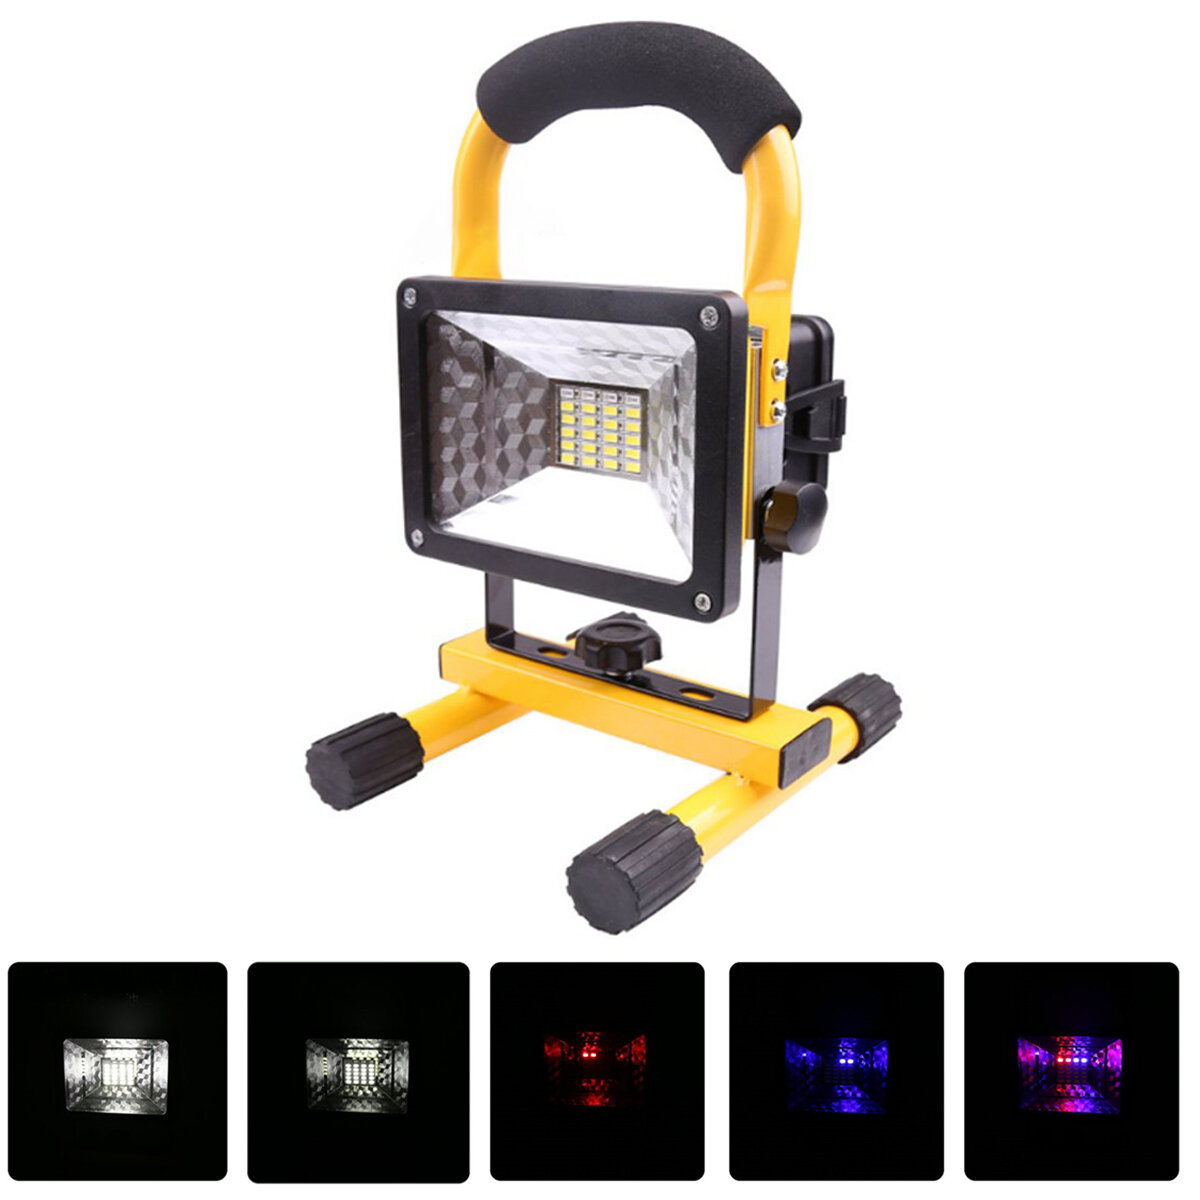 30W 24LED Portable Rechargeable Flood Light Waterproof Spot Work Latern Outdoor Camping Lawn Lamp